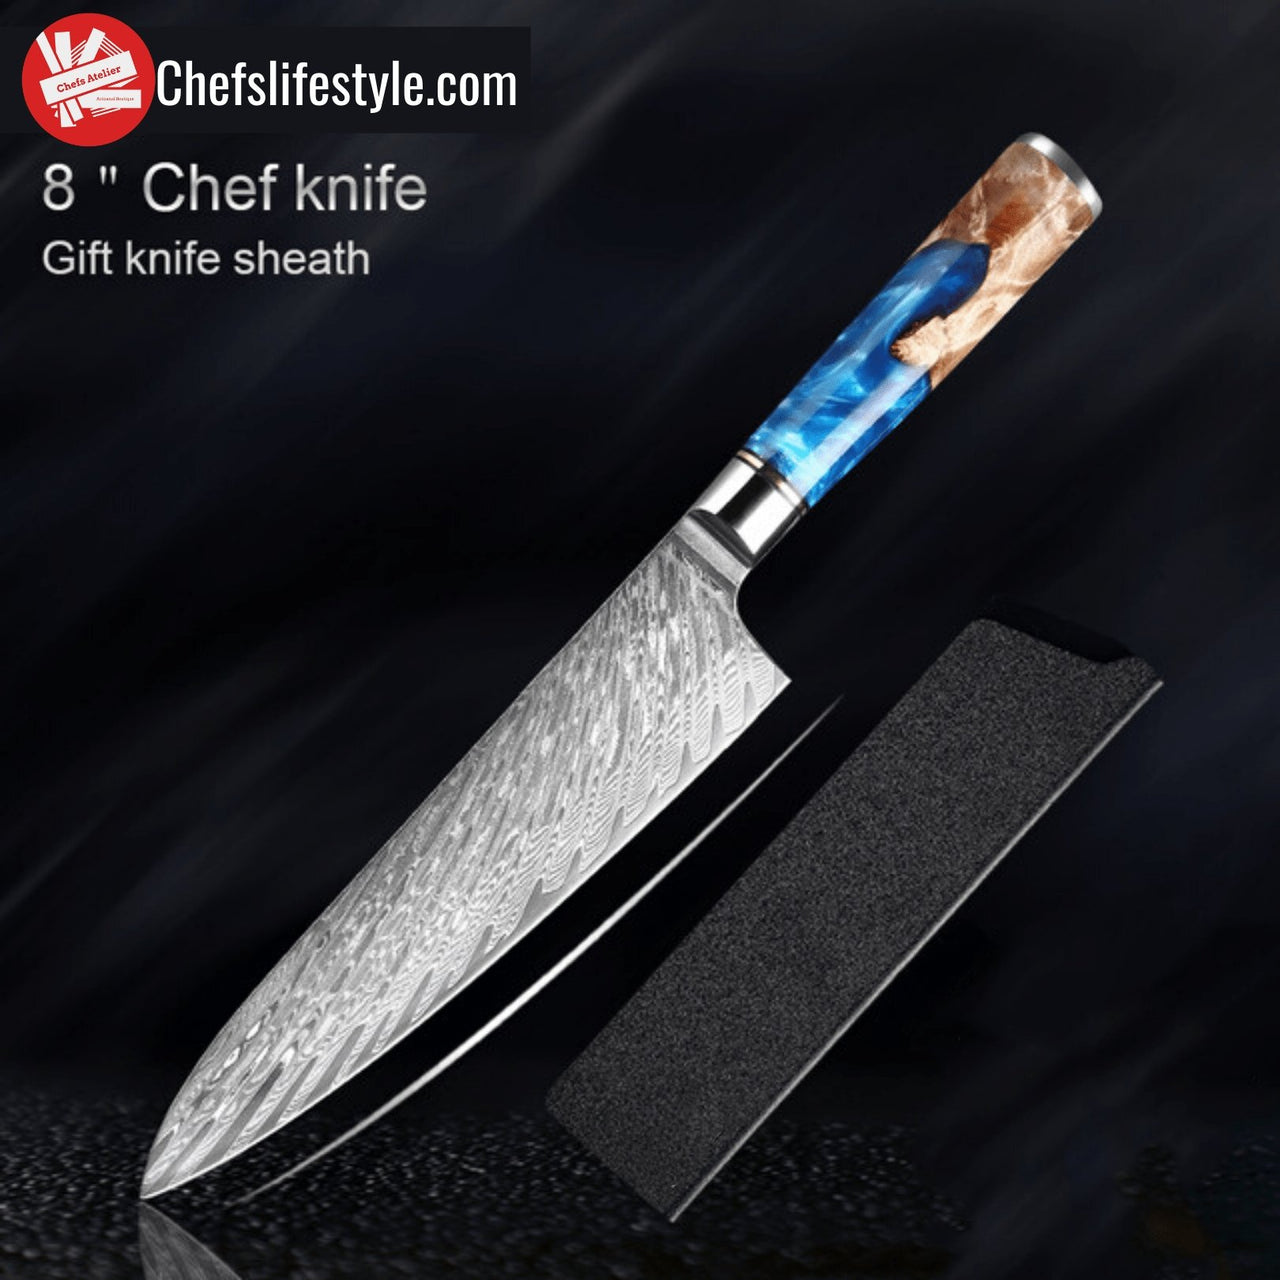 chefslifestyle chef lifestyle Chefs Atelier by Unicommerce Pte. Ltd. Kiyomi Series Knife 8 inch chef knife damascus knives chef knife chef atelier best knife japanese review top lightweight balanced hand made kiritsuke serbian butcher knife hand forged best top quality free shipping high carbon steel